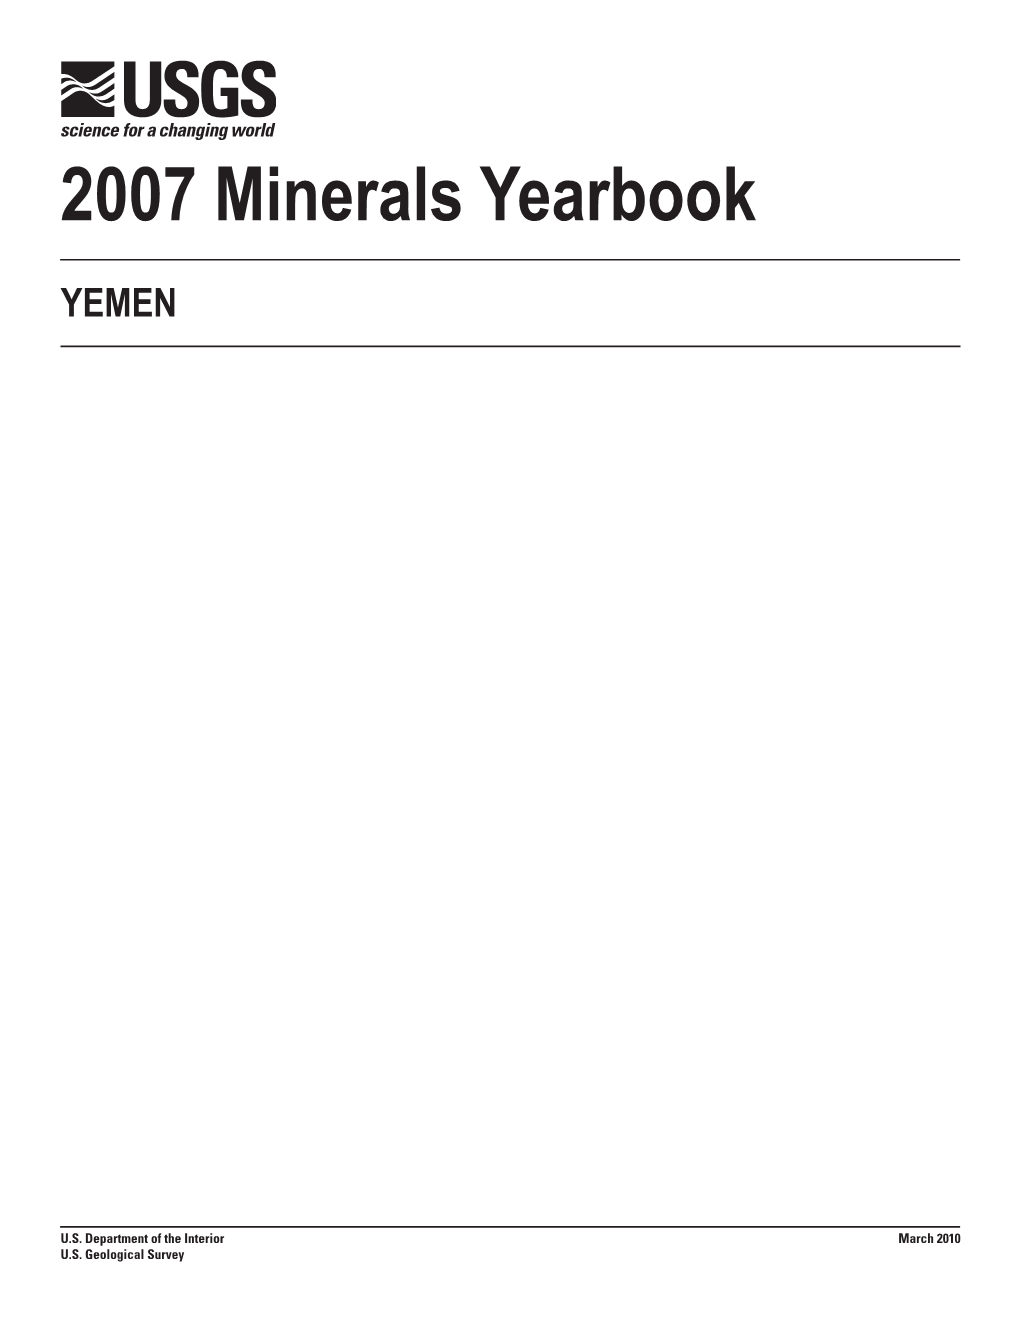 The Mineral Industry of Yemen in 2007